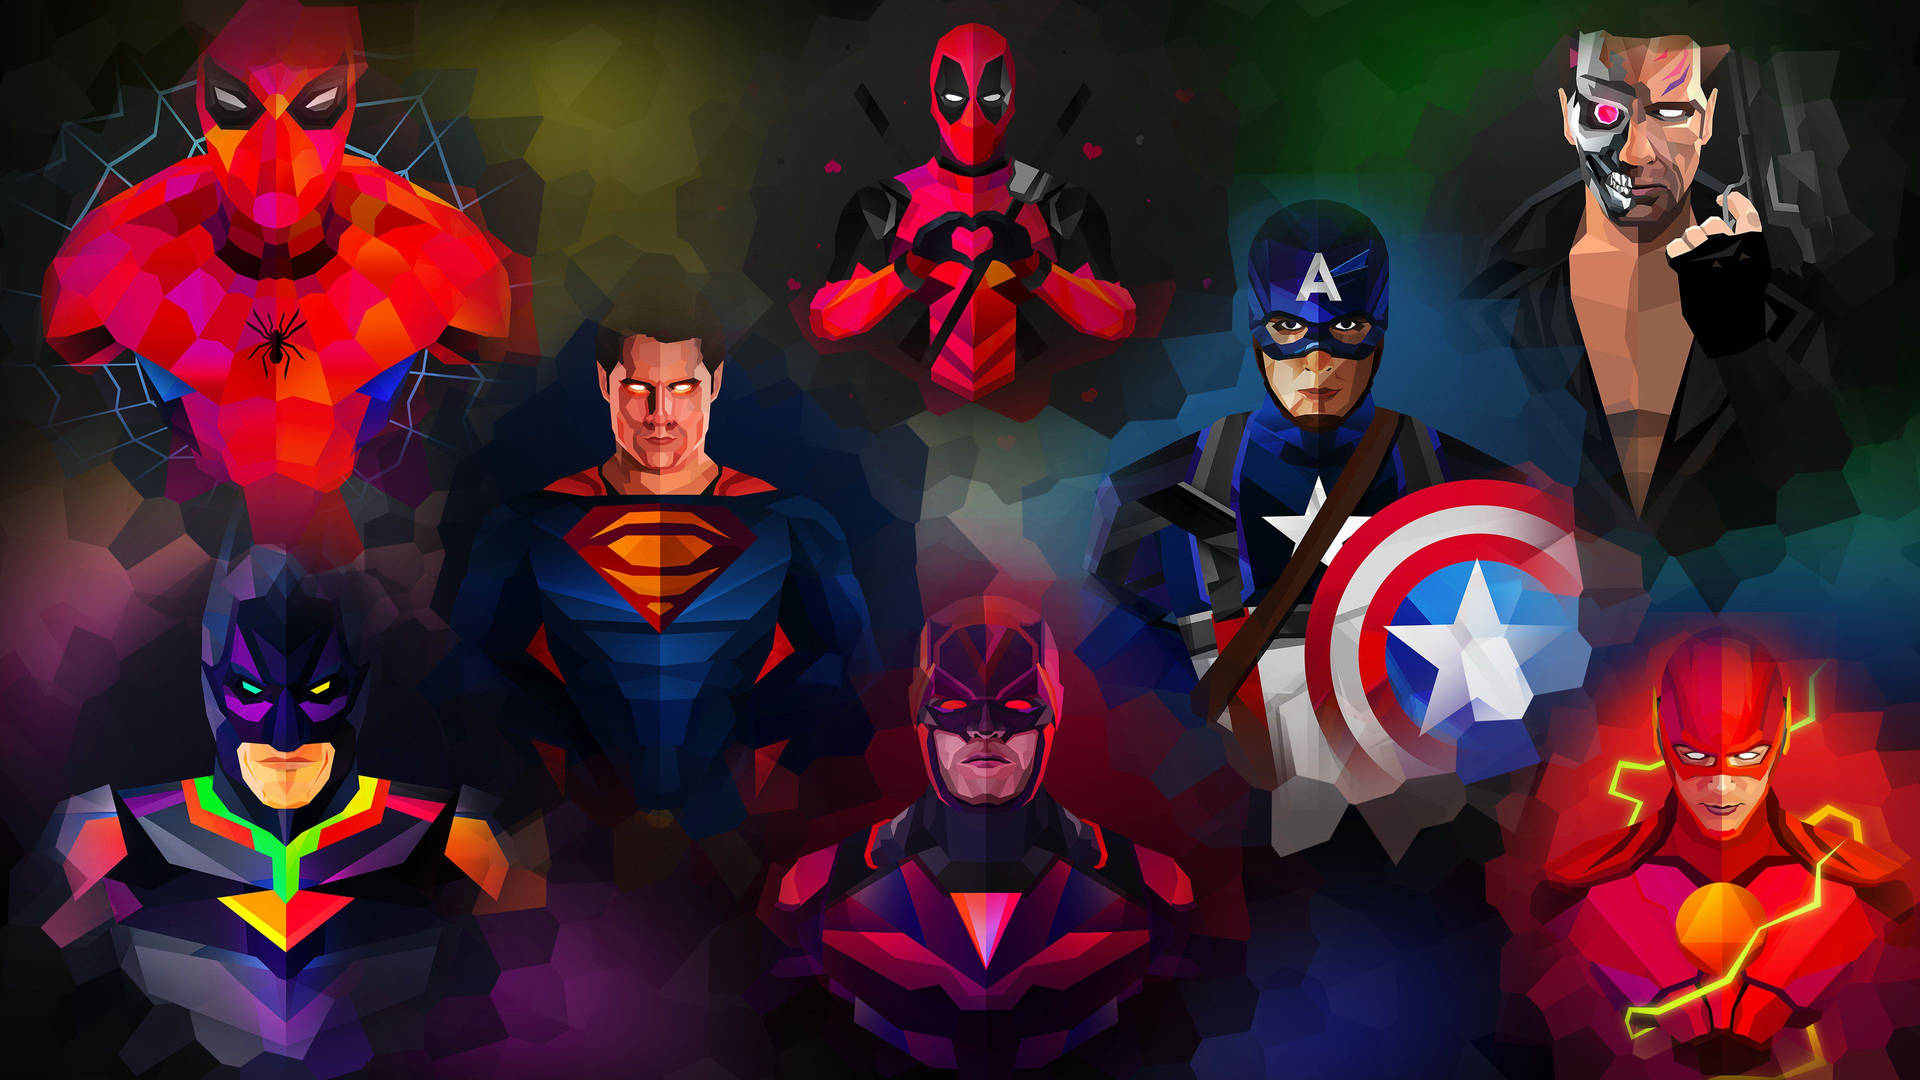 Quilted-patterned superhero art Wallpaper